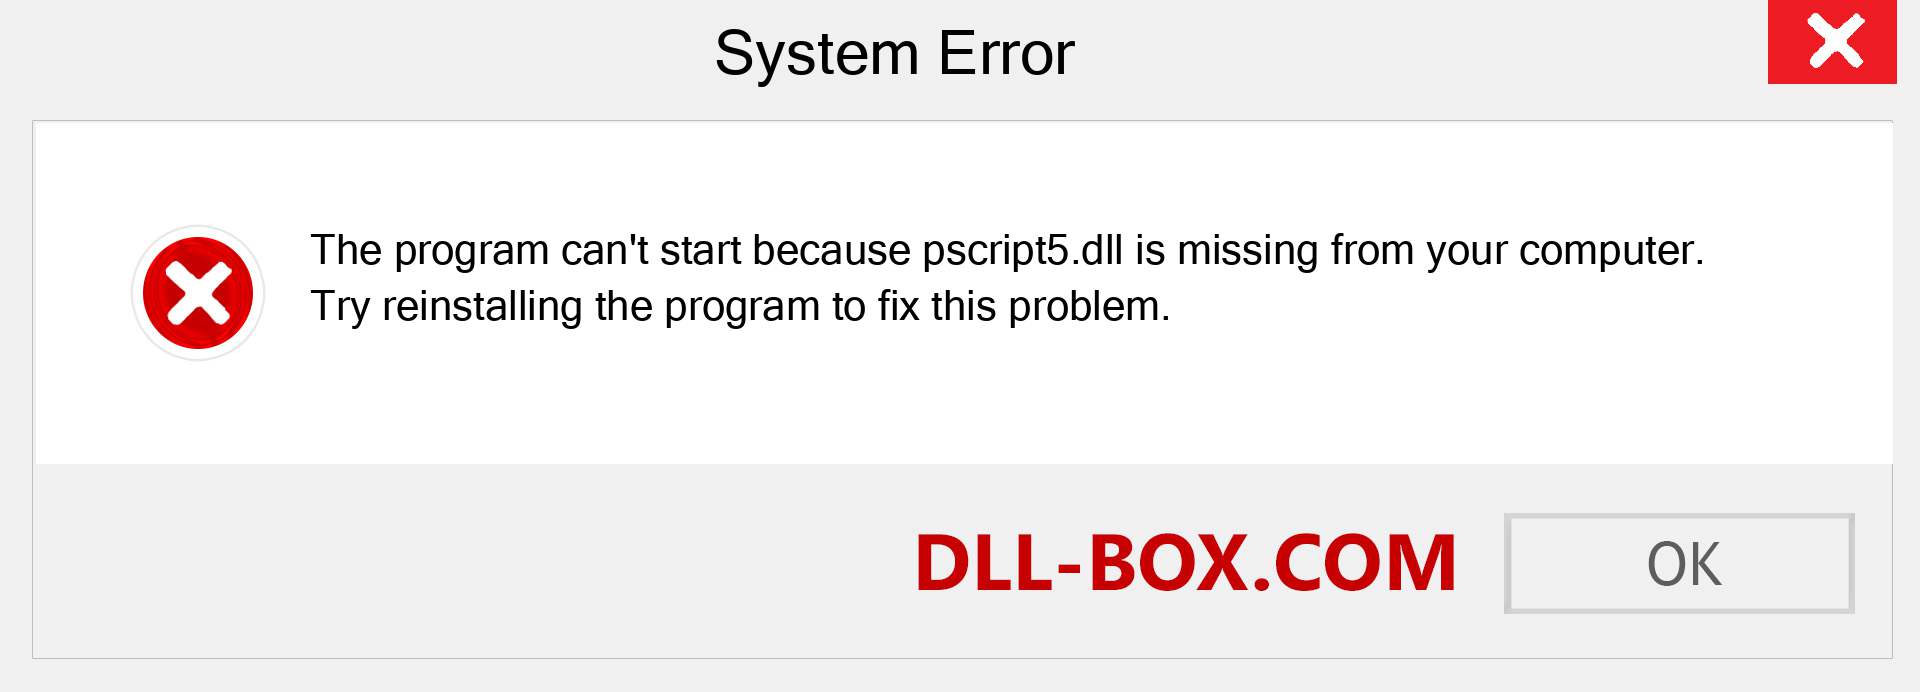  pscript5.dll file is missing?. Download for Windows 7, 8, 10 - Fix  pscript5 dll Missing Error on Windows, photos, images